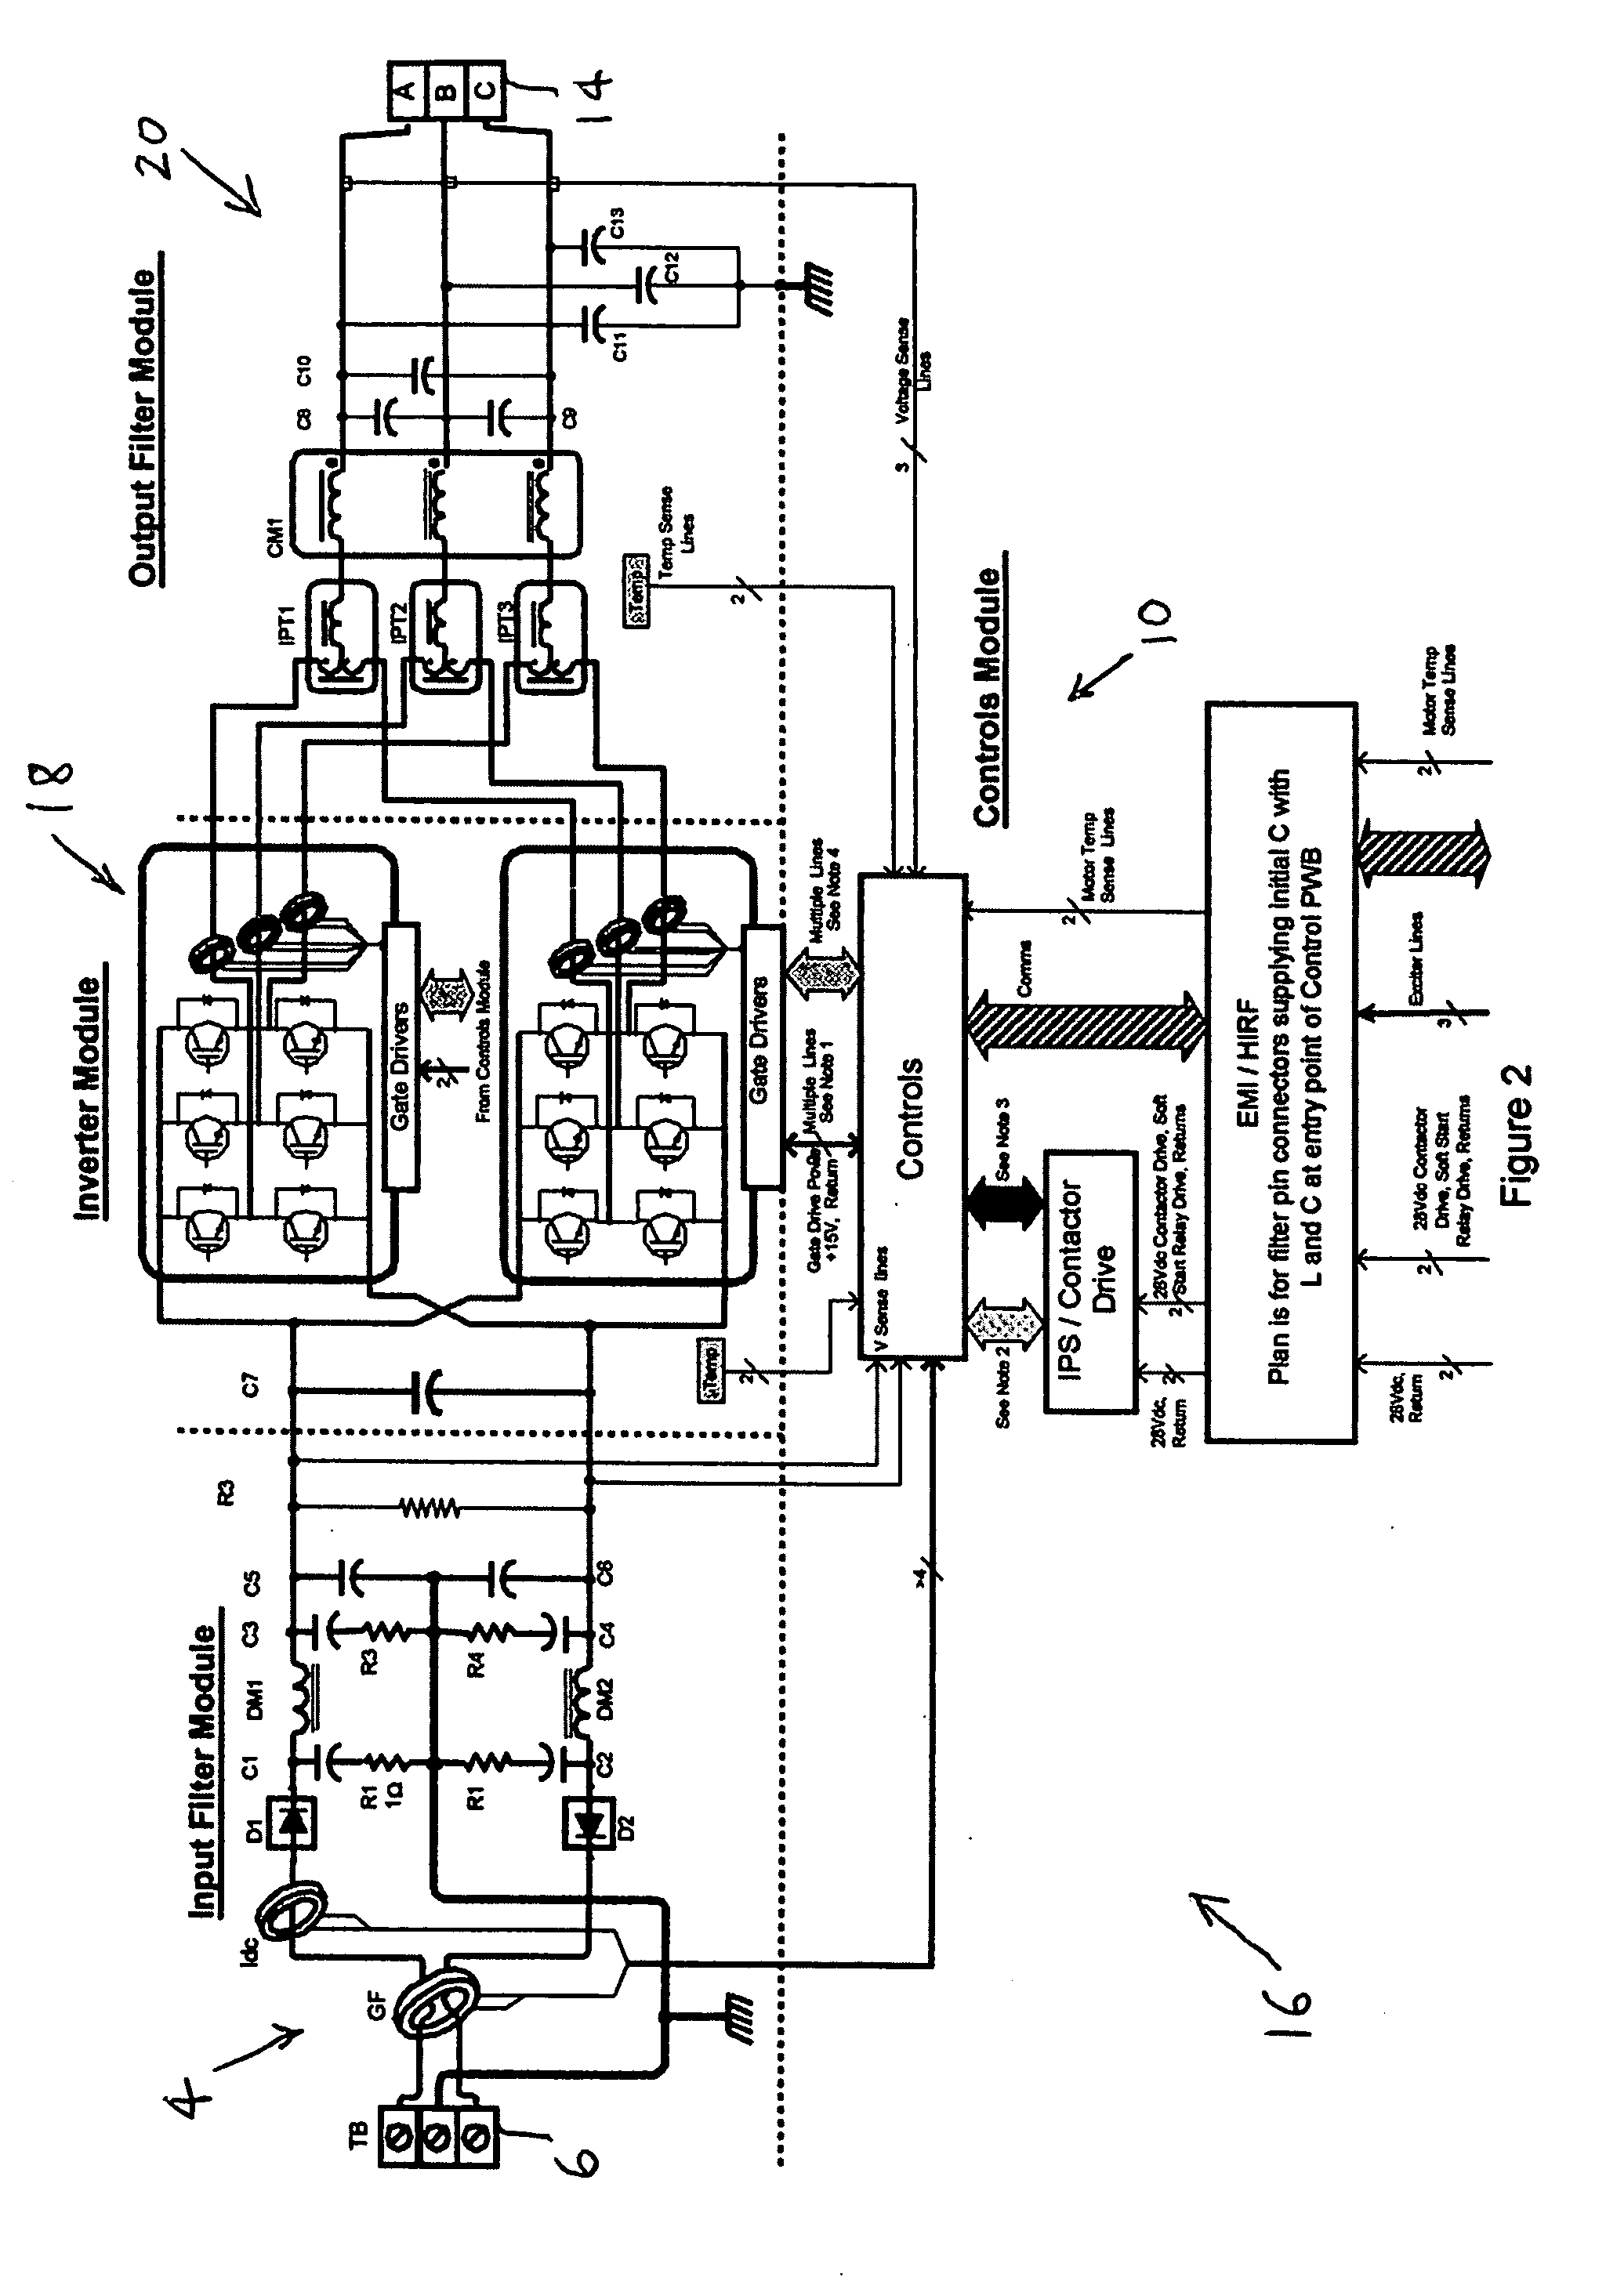 Parallel inverter motor drive with improved waveform and reduced filter requirements